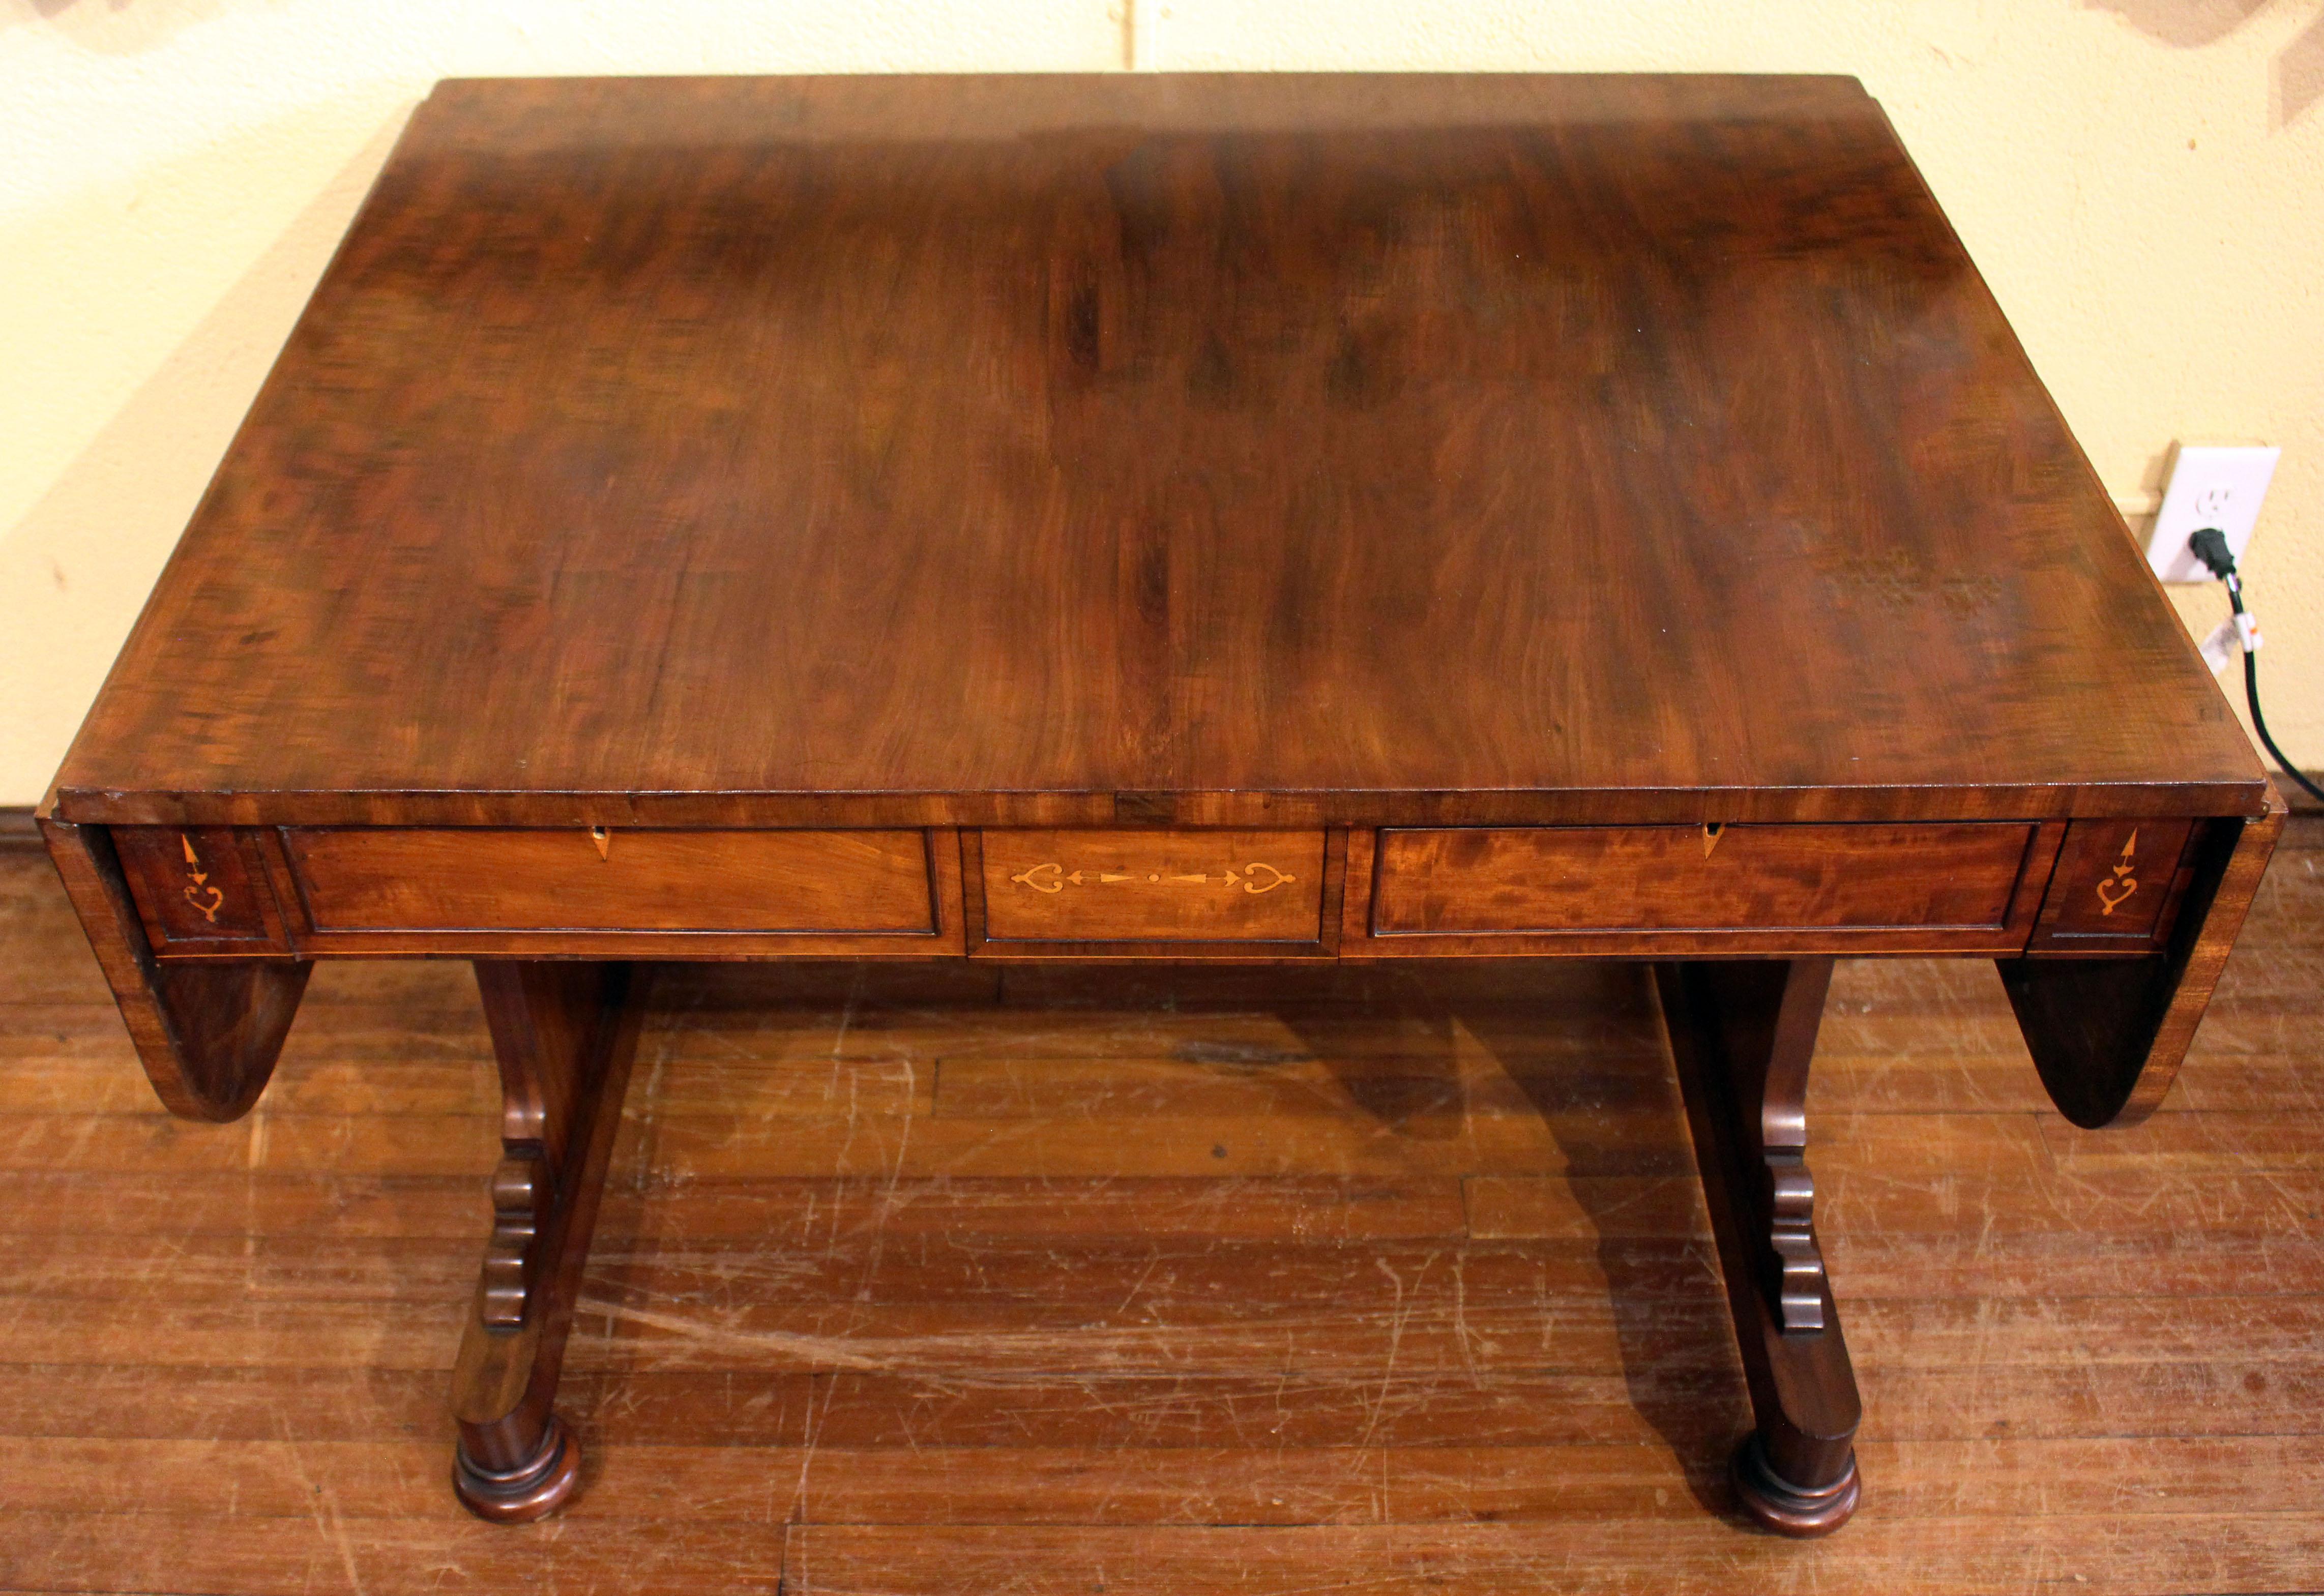 Circa 1820s sofa table in plum pudding mahogany with boxwood inlays and escutcheons. English, George IV. Opposing faux and functioning drawers. Sleek lines that blend with a multitude of styles. Oak and ash secondary wood. English. Measures: 30 3/8